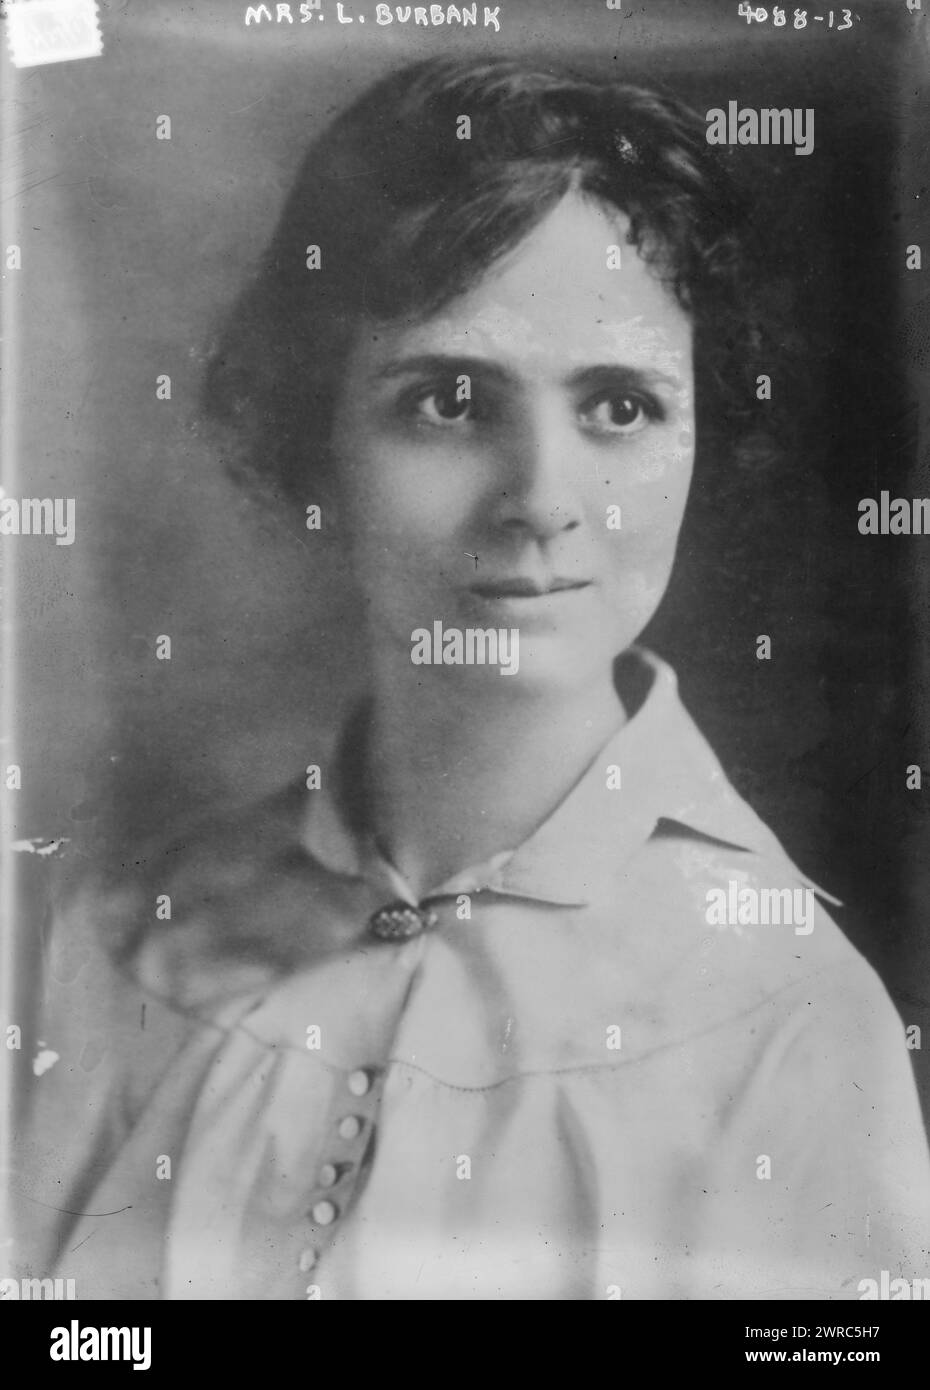 Mrs. L. Burbank, Photograph shows Elizabeth Jane 'Bessie' Waters Burbank (1887-1977) who married plant scientist Luther Burbank (1849-1926) in December 1916. She had served as his private secretary., 1917 Feb. 29, Glass negatives, 1 negative: glass Stock Photo